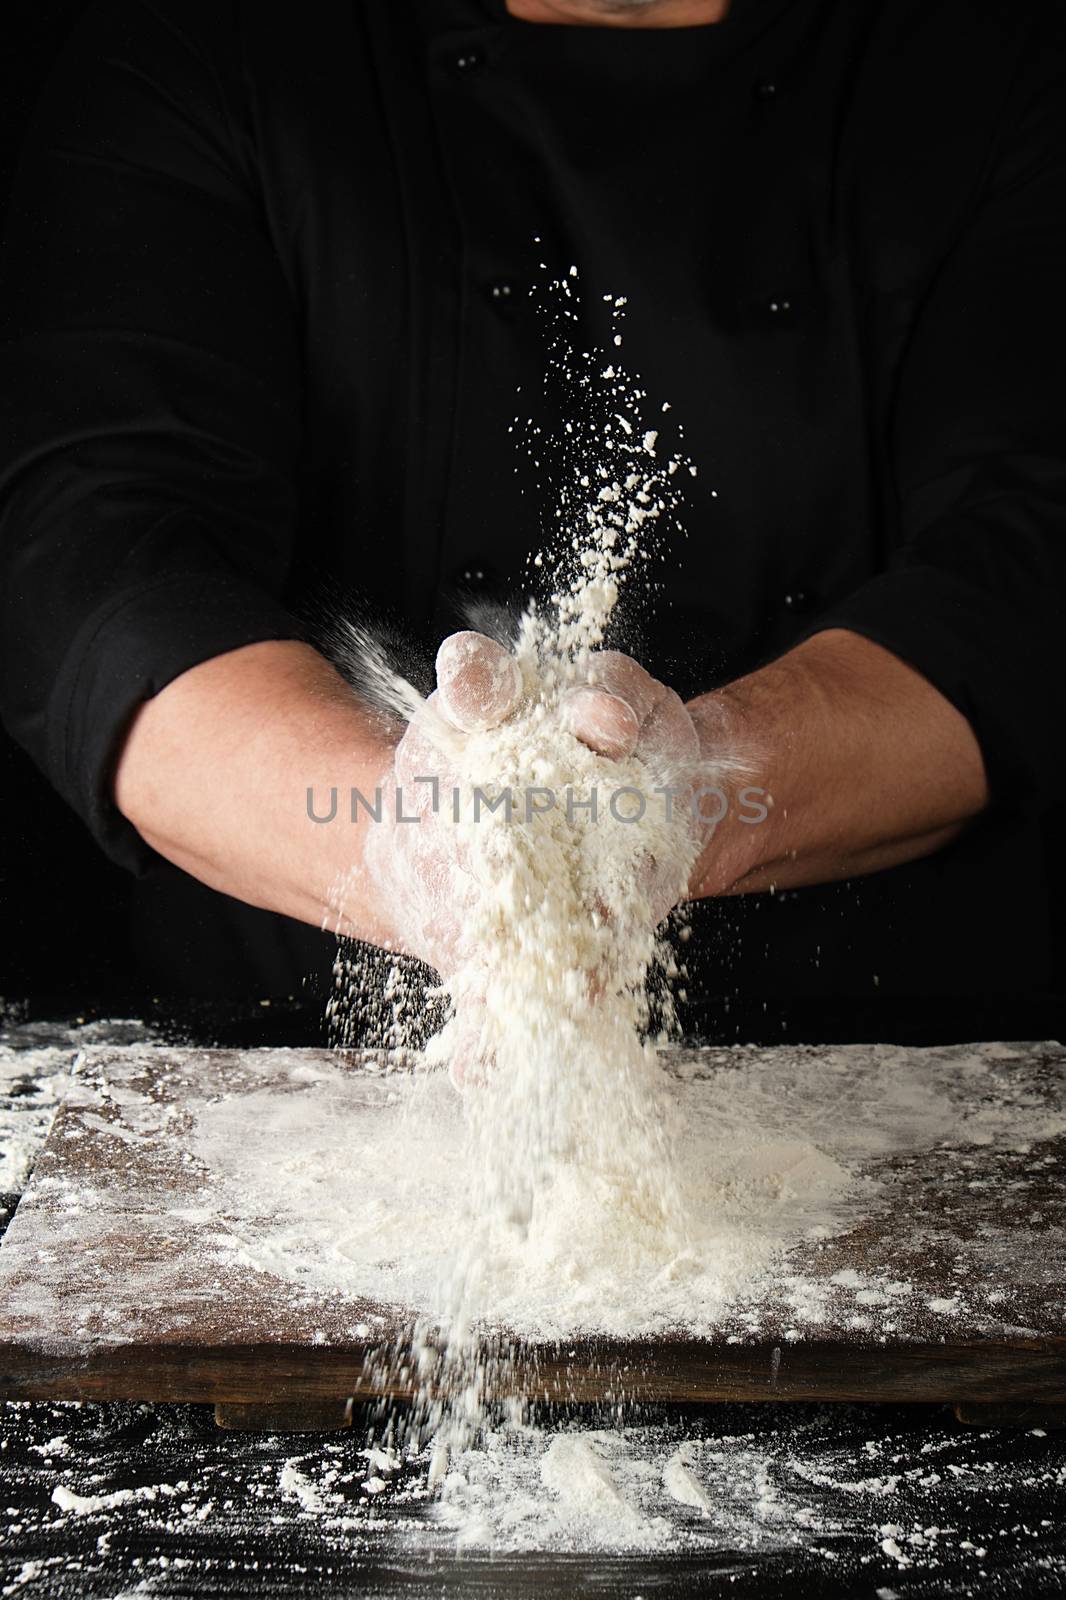 chef in black uniform sprinkles white wheat flour in different directions, product scatters dust, black background